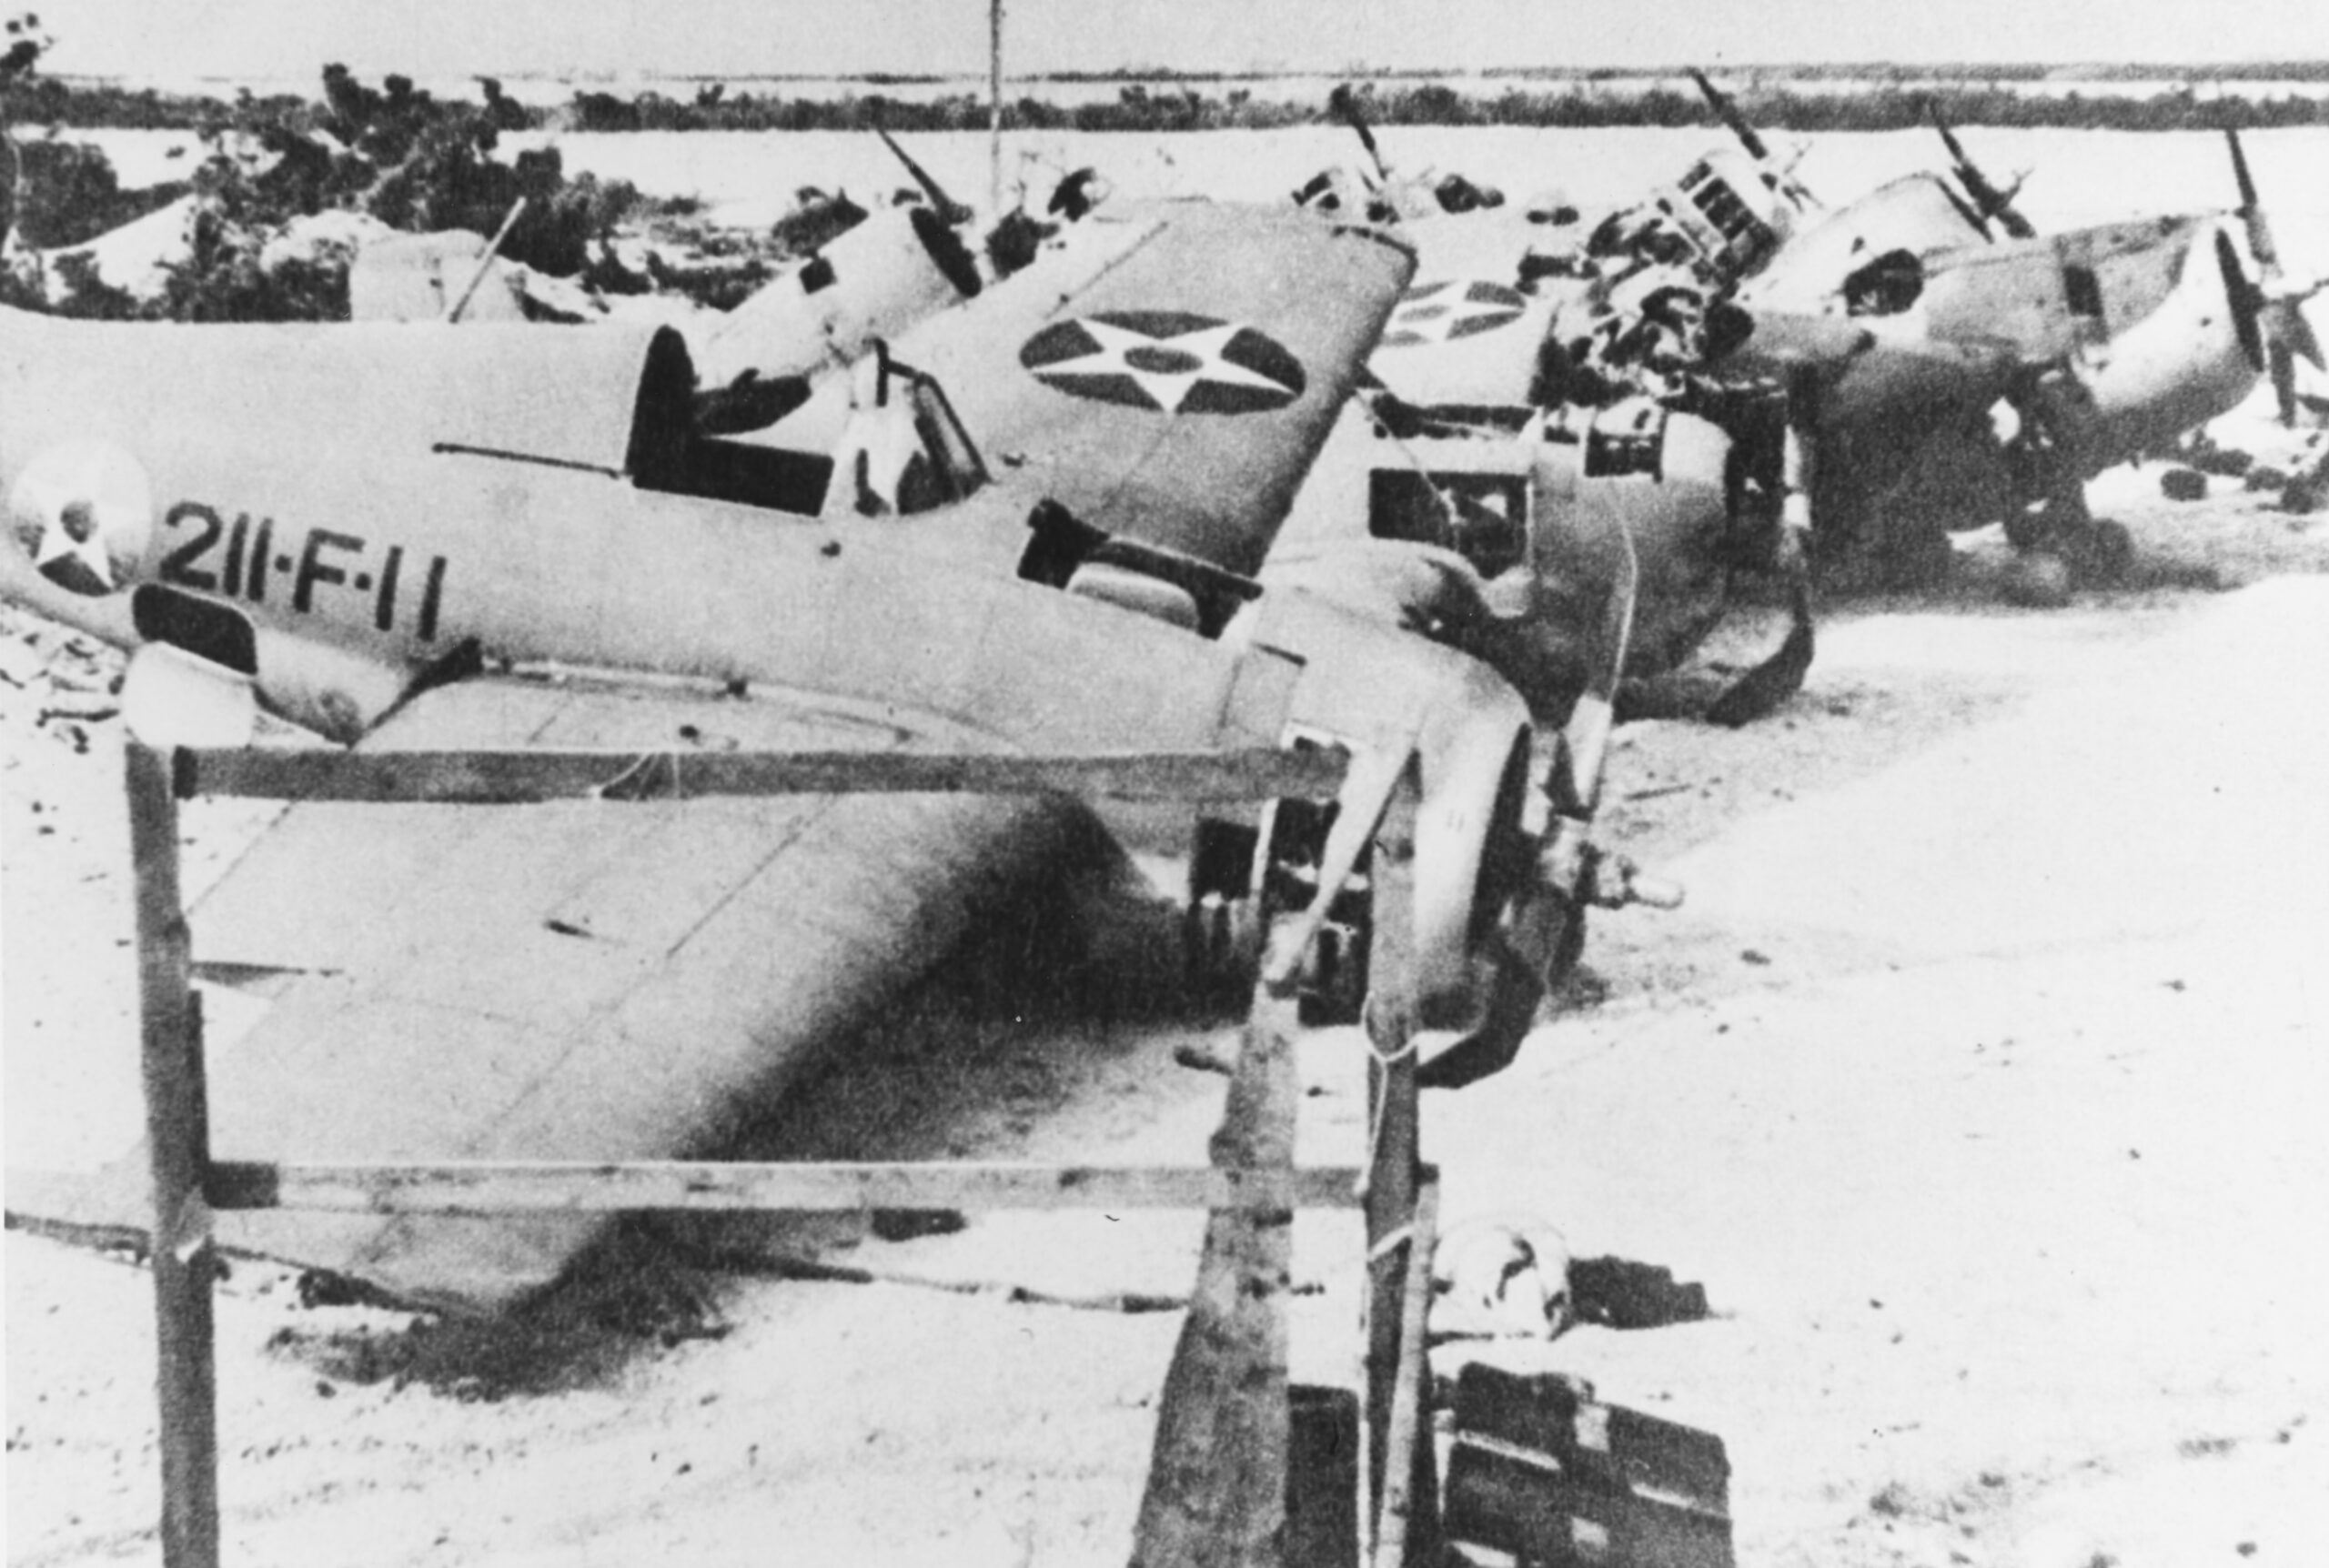 Wreckage of American Wildcat fighterson Wake Island after Dec. 1941 invasion.